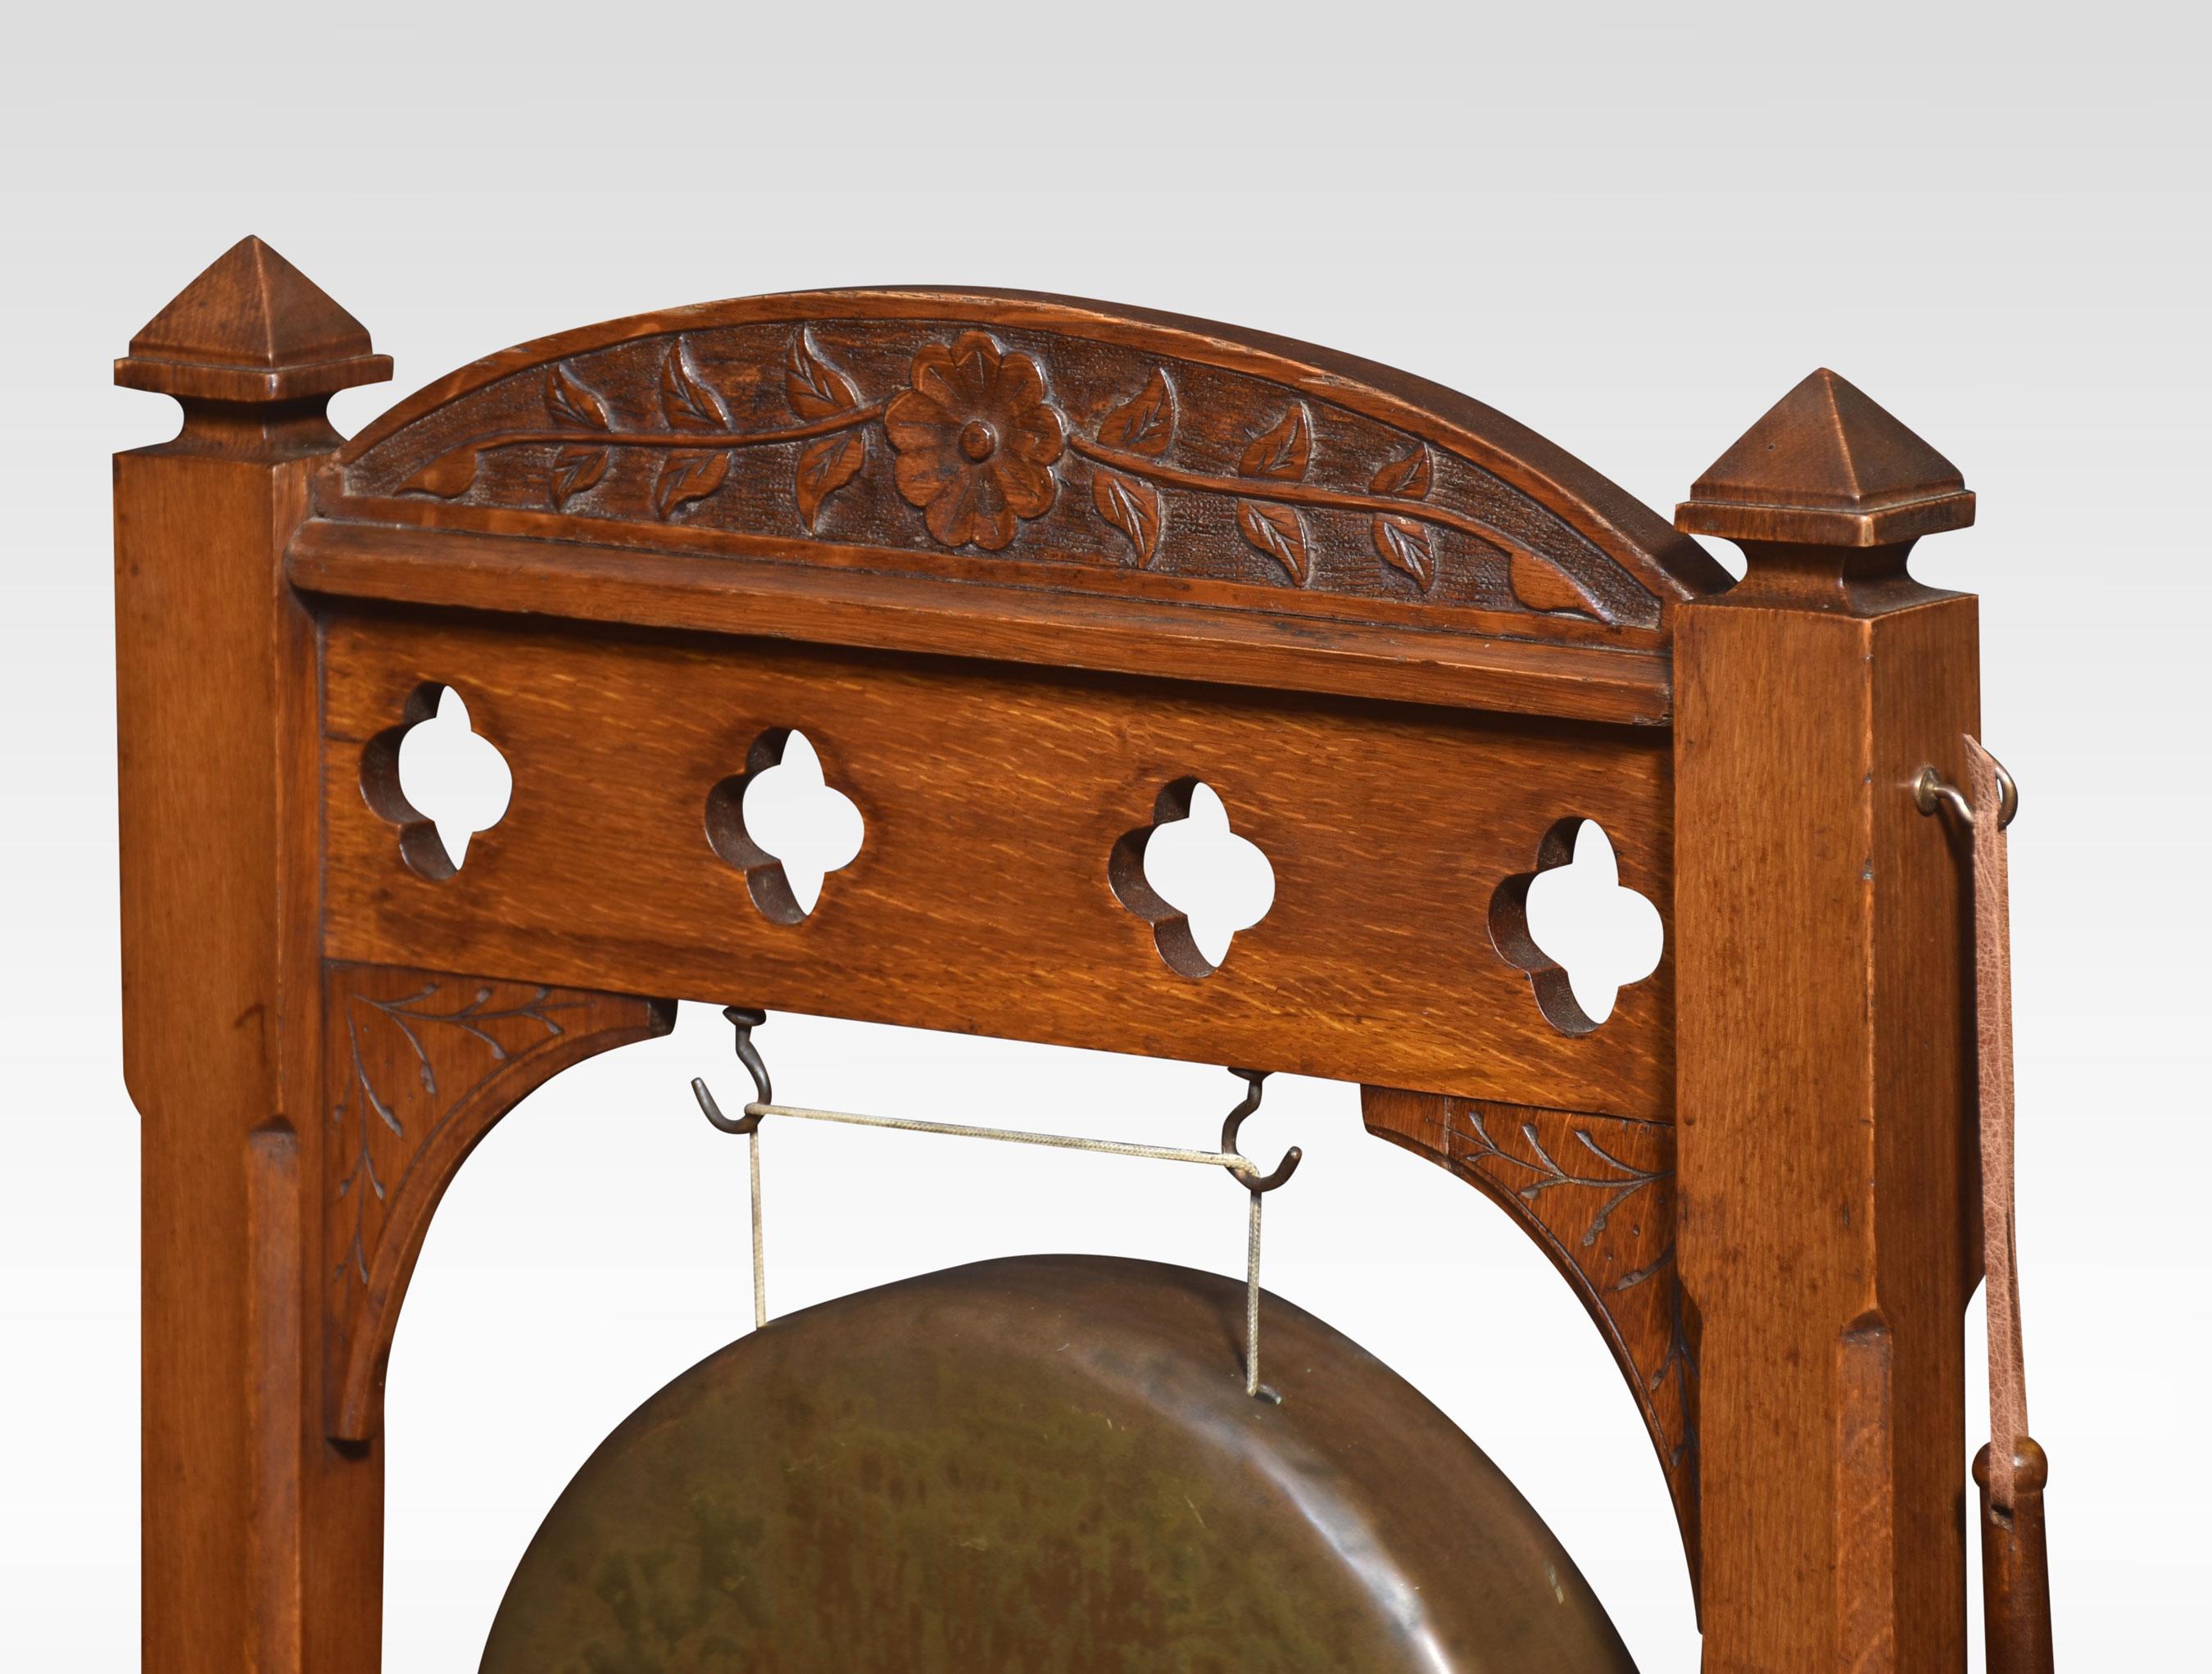 Gothic revival dinner gong, the carved walnut frame supporting the original brass gong. Together with beater.
Dimensions
Height 39.5 Inches
Width 24 Inches
Depth 15 Inches